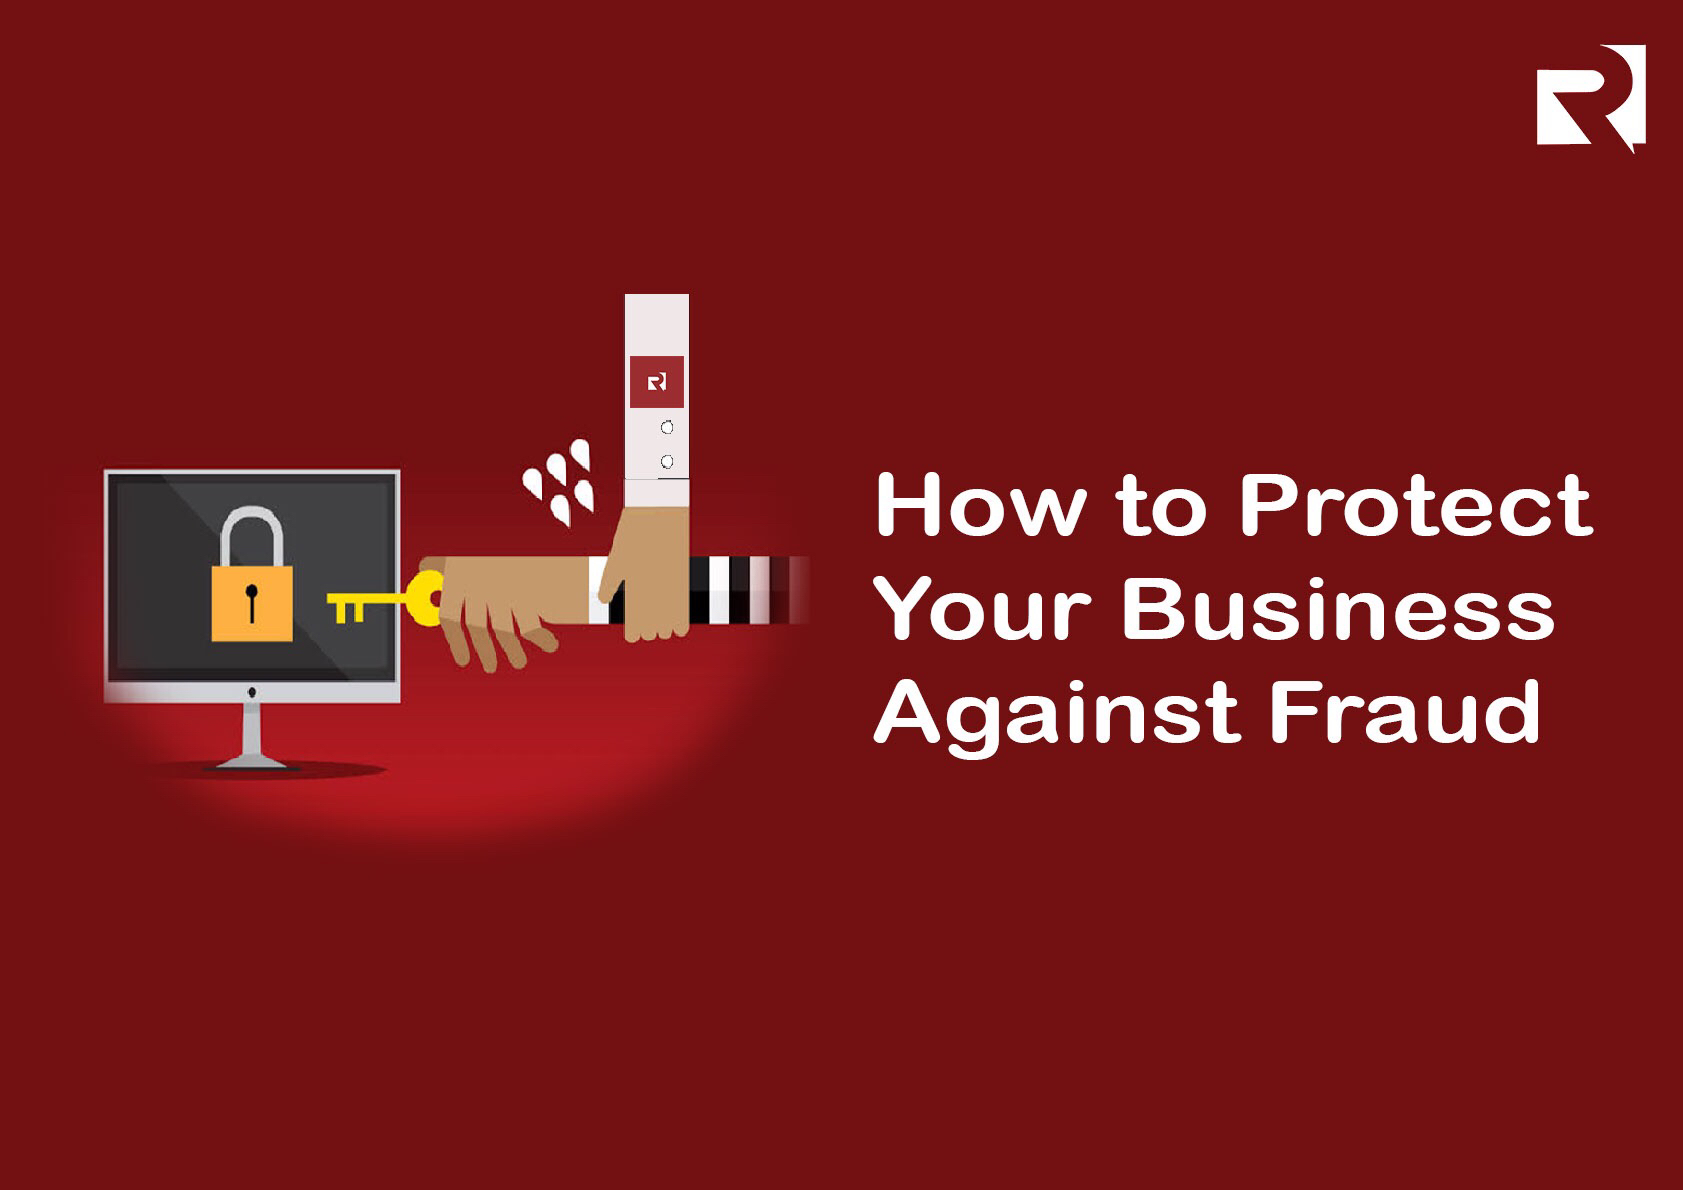 How to Protect your Business Against Fraud